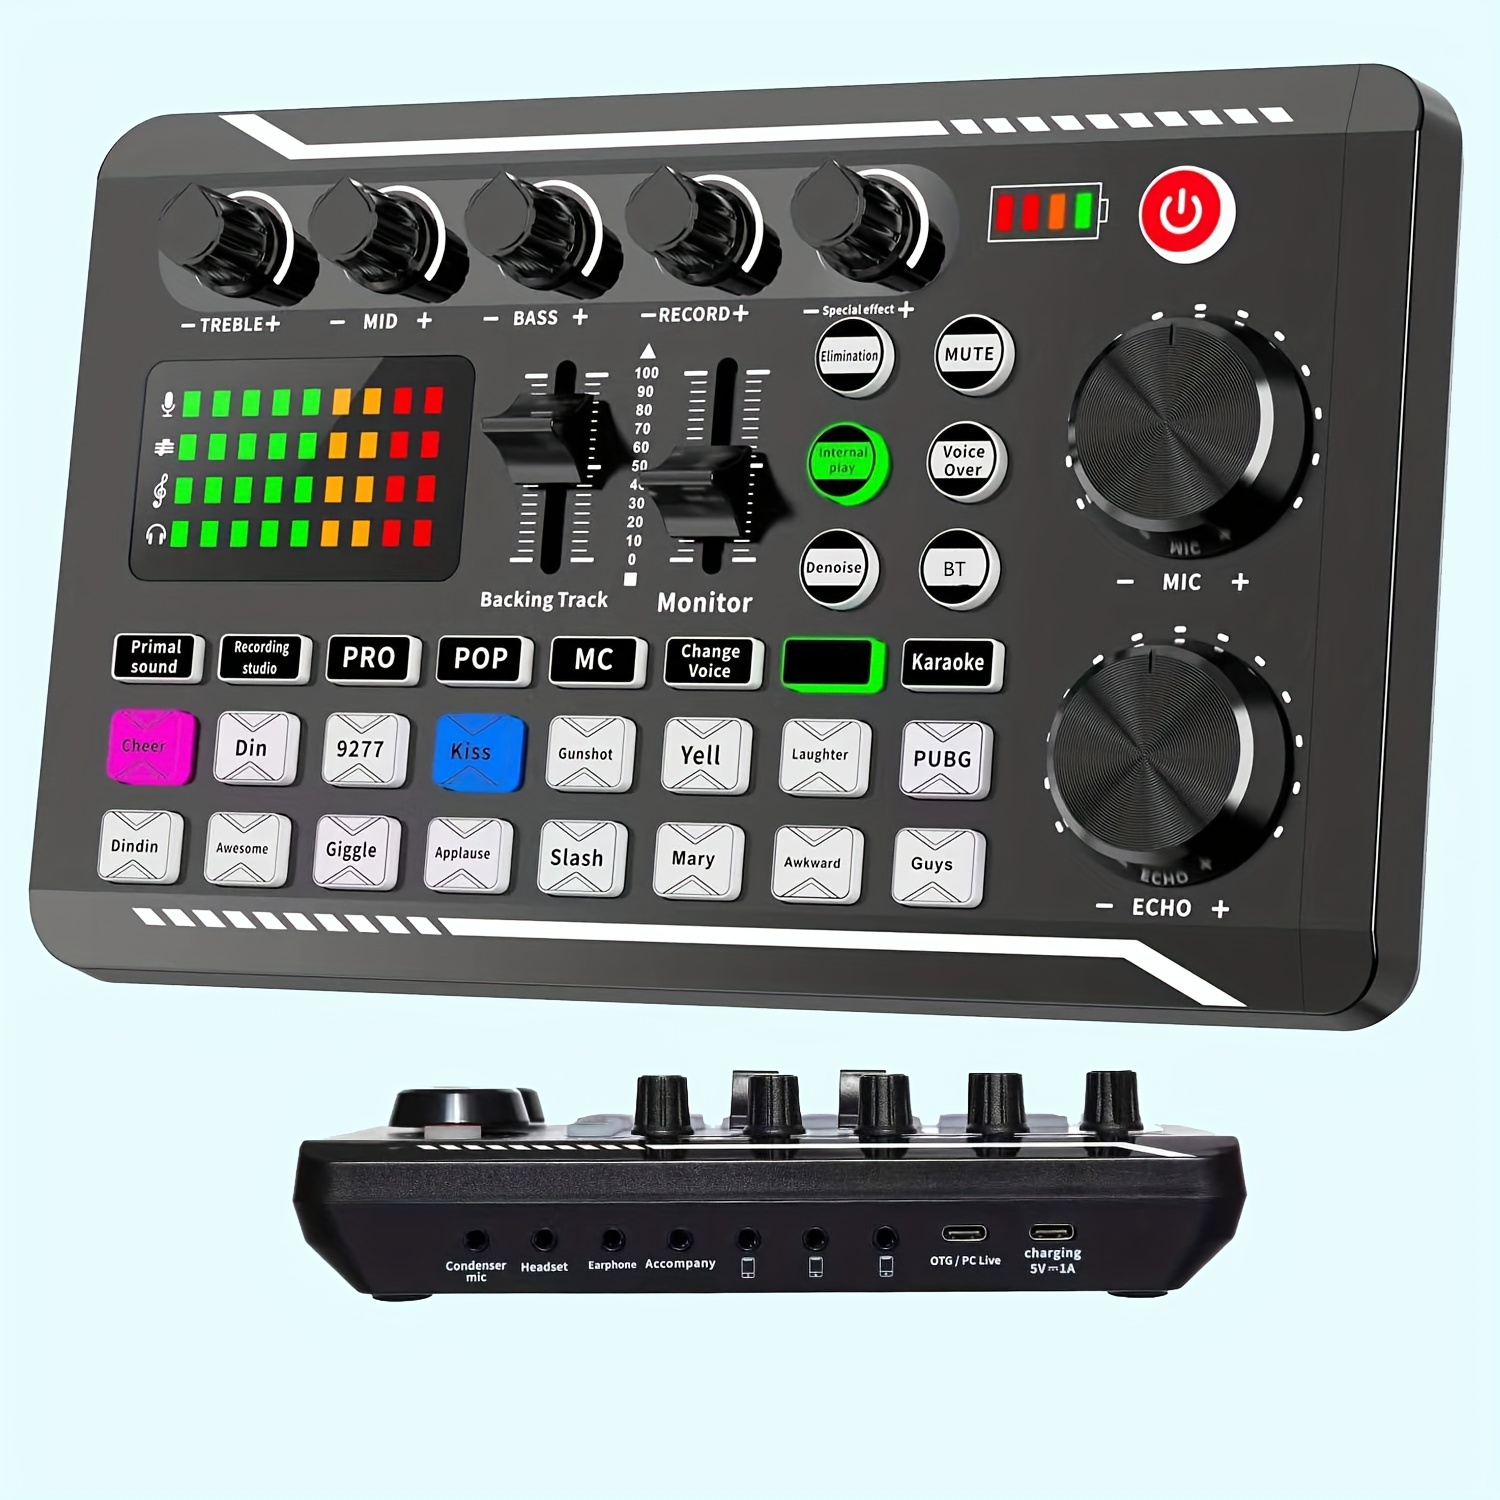 

Live Sound Card Audio Mixer, With Usb Charging, Volume Control, Battery Indicator, For Karaoke, Video Conferencing, Gaming, Streaming Eid Al-adha Mubarak